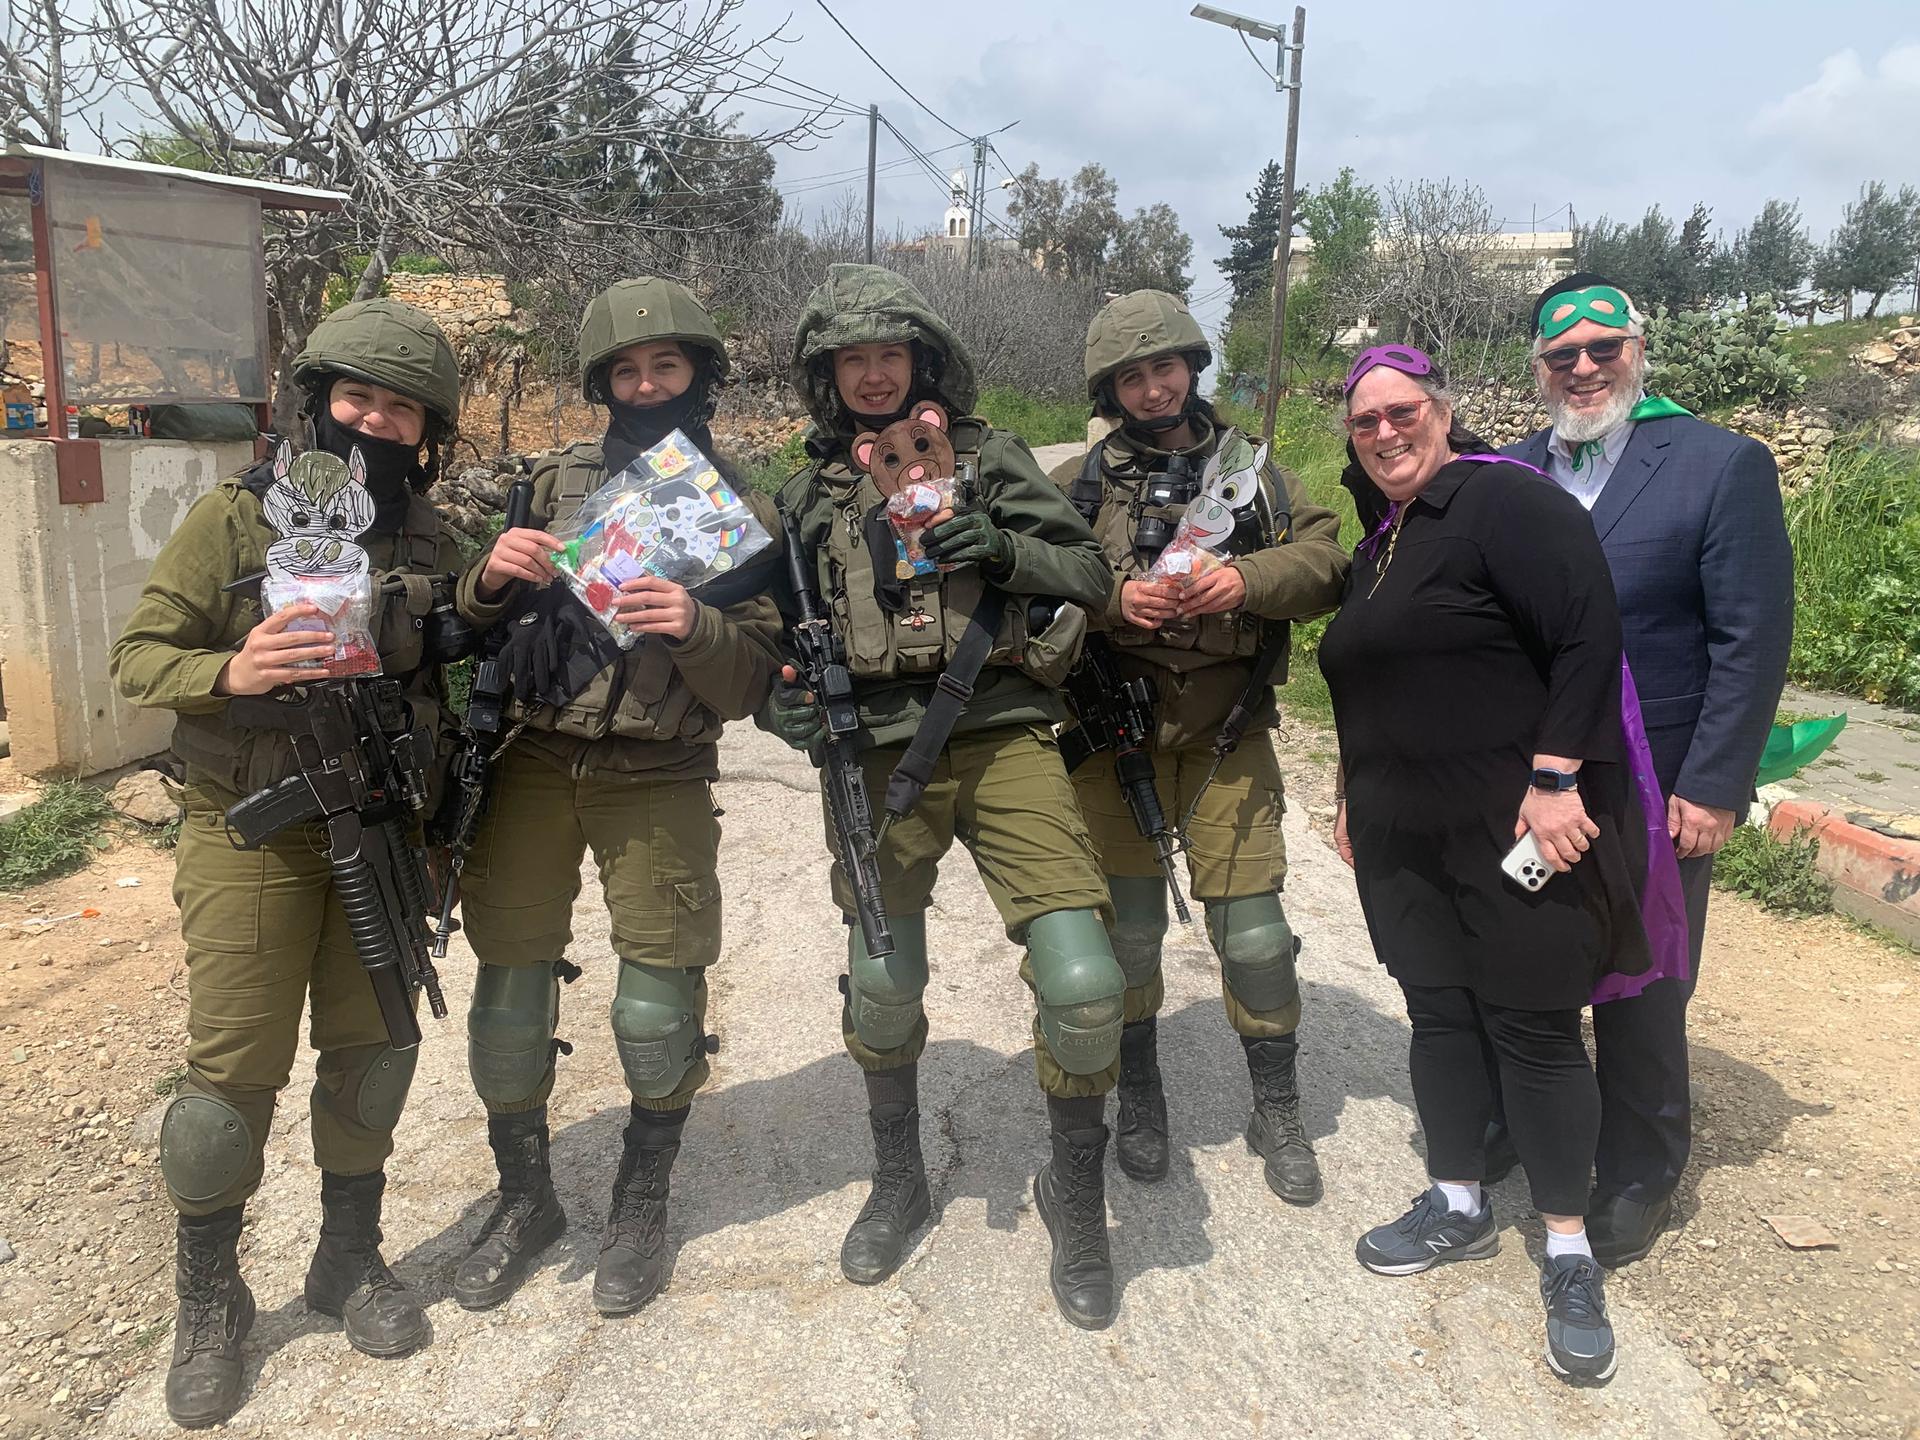 Judy and Chaim Freud, who live in the West Bank settlement of Efrat, deliver mishloach manot (Purim gift packages) to Israeli soldiers guarding the edge of the settlement on its border with Bethlehem, a Palestinian city.